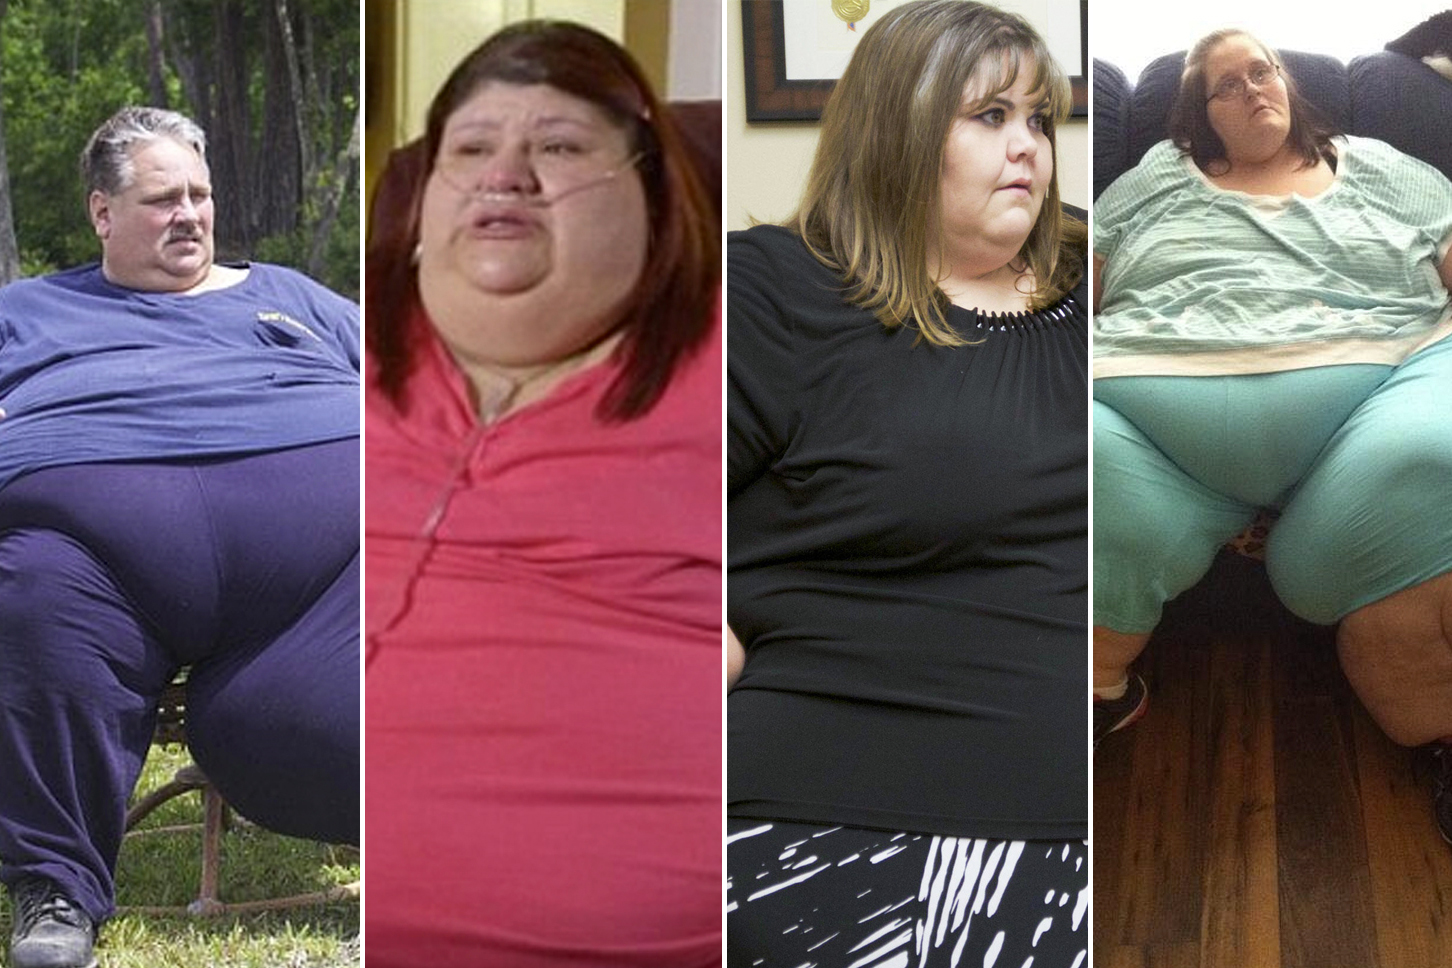 'My 600lb Life' Star Milla Clark 'Feels So Good' After Her Weight Loss